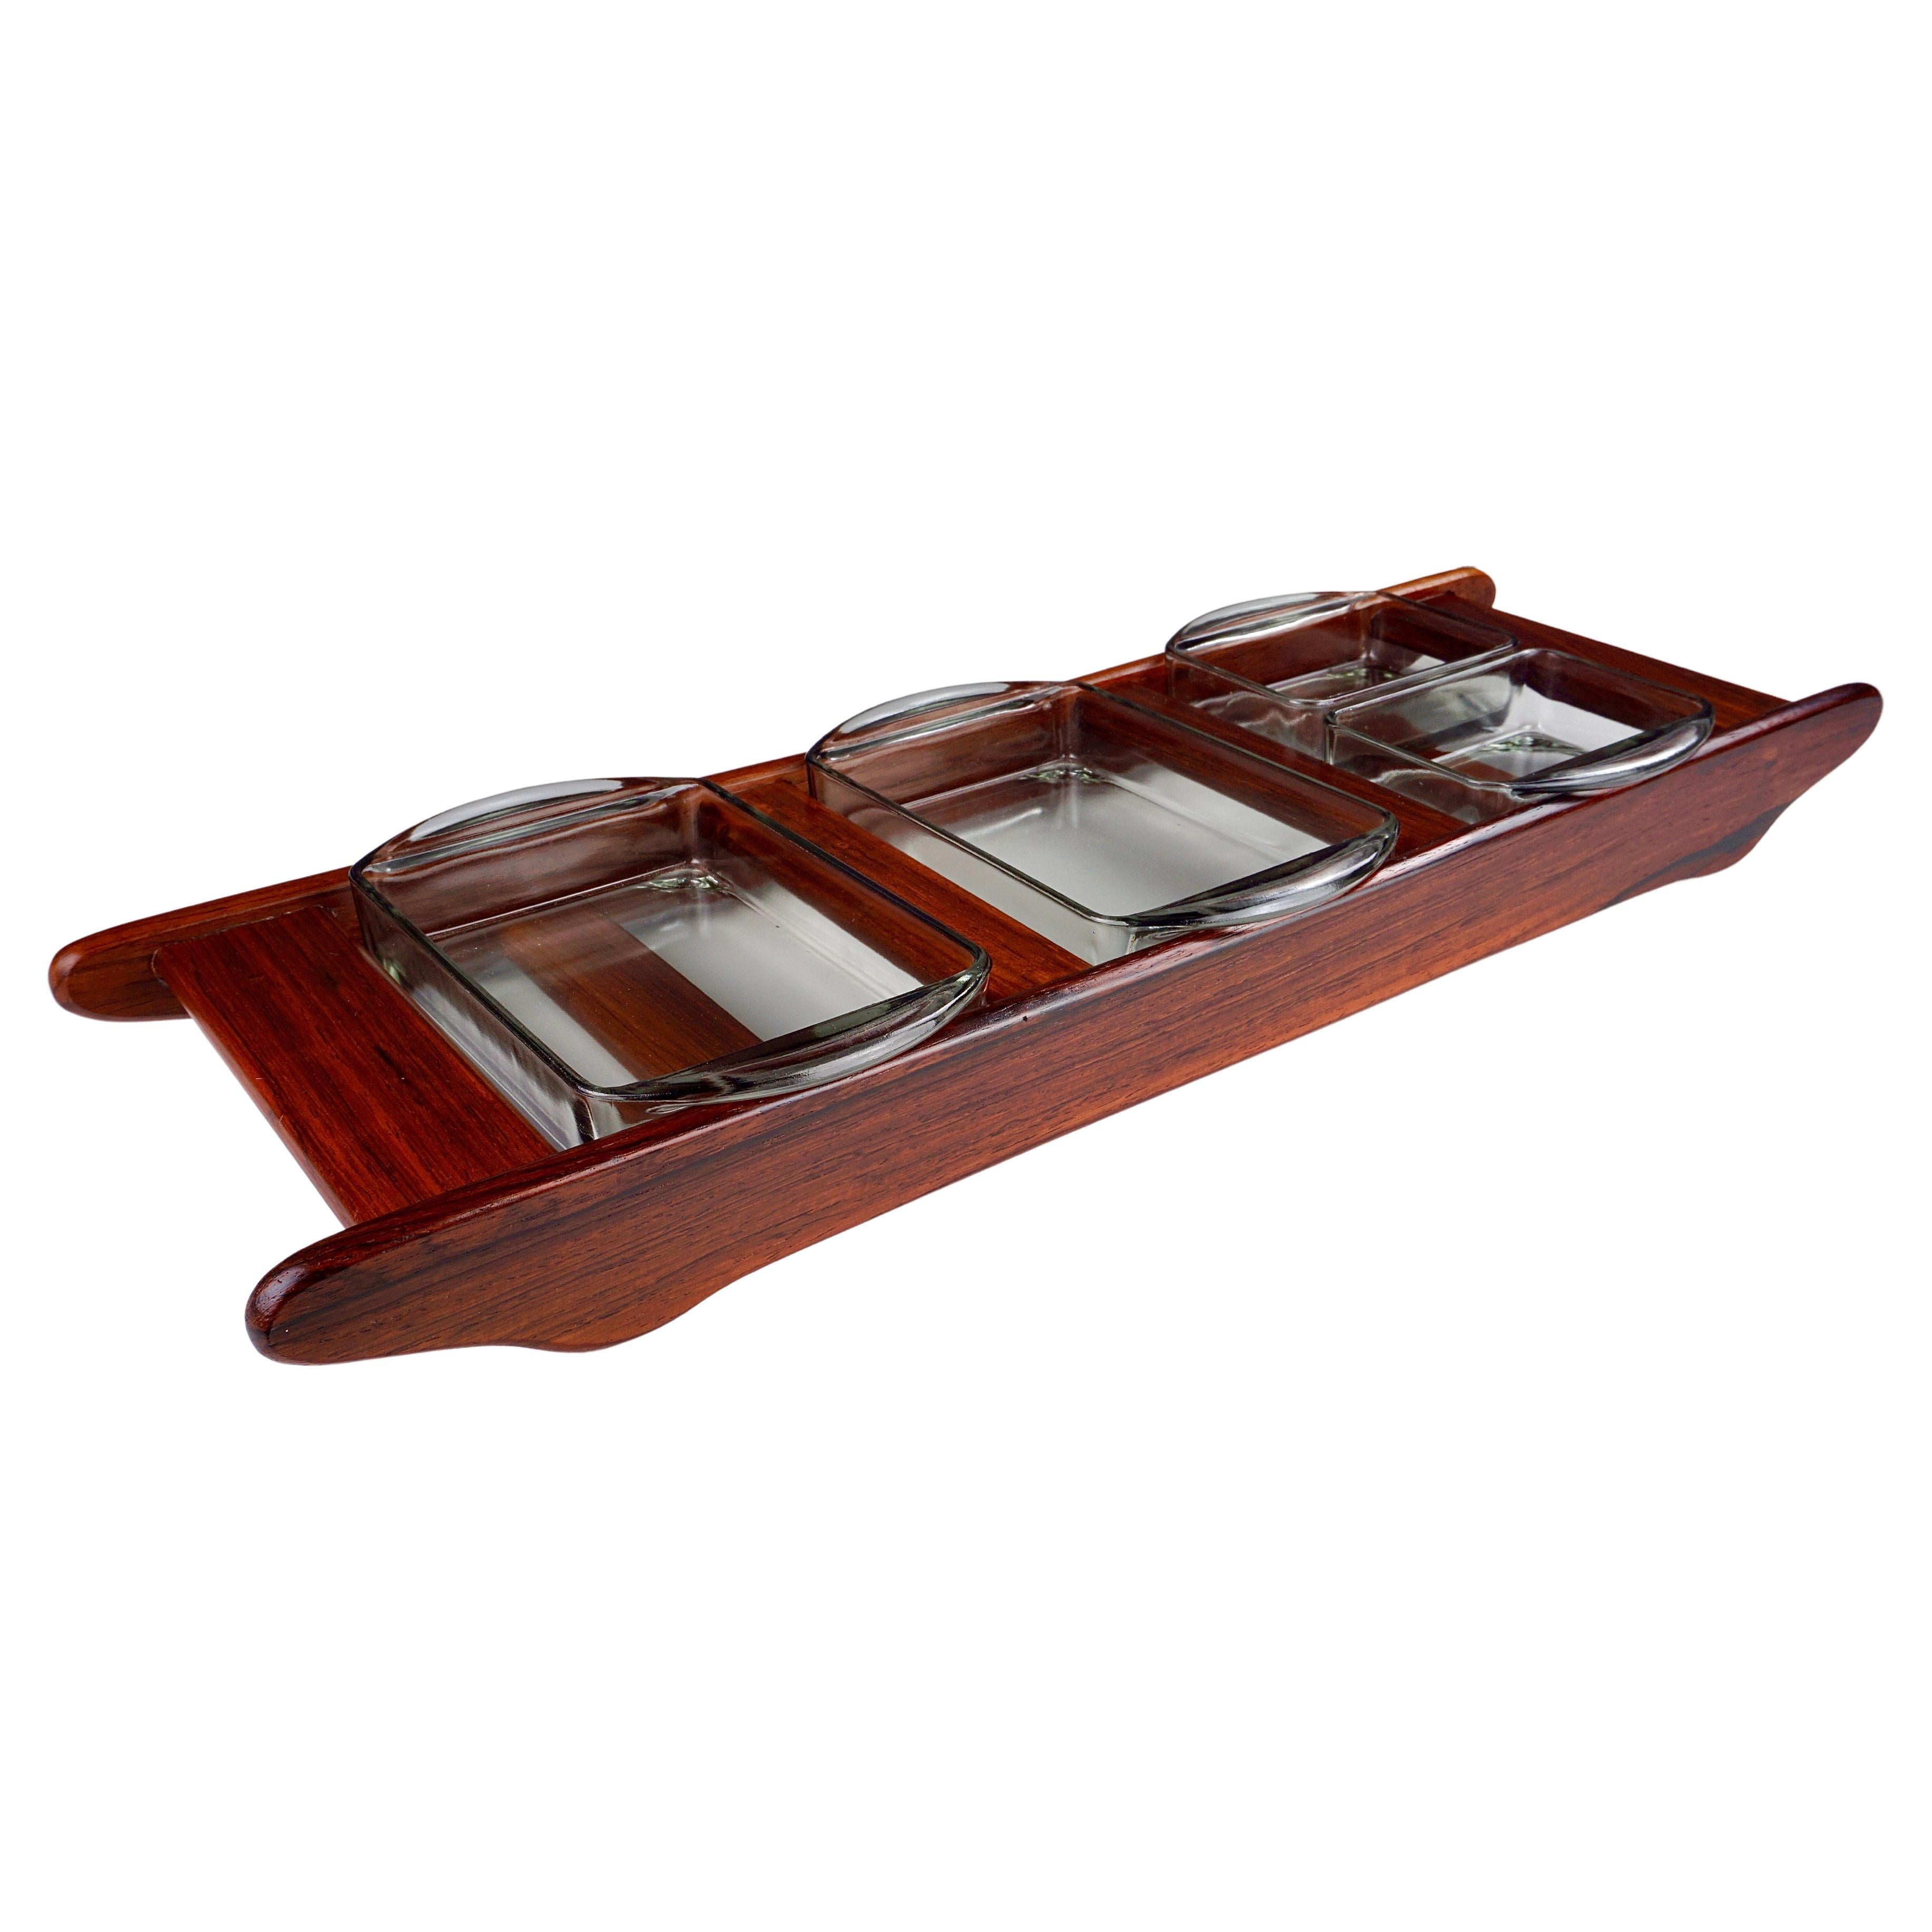 1960´S Danish Rosewood Serving Tray with Small Dishes for Culinary Accessories